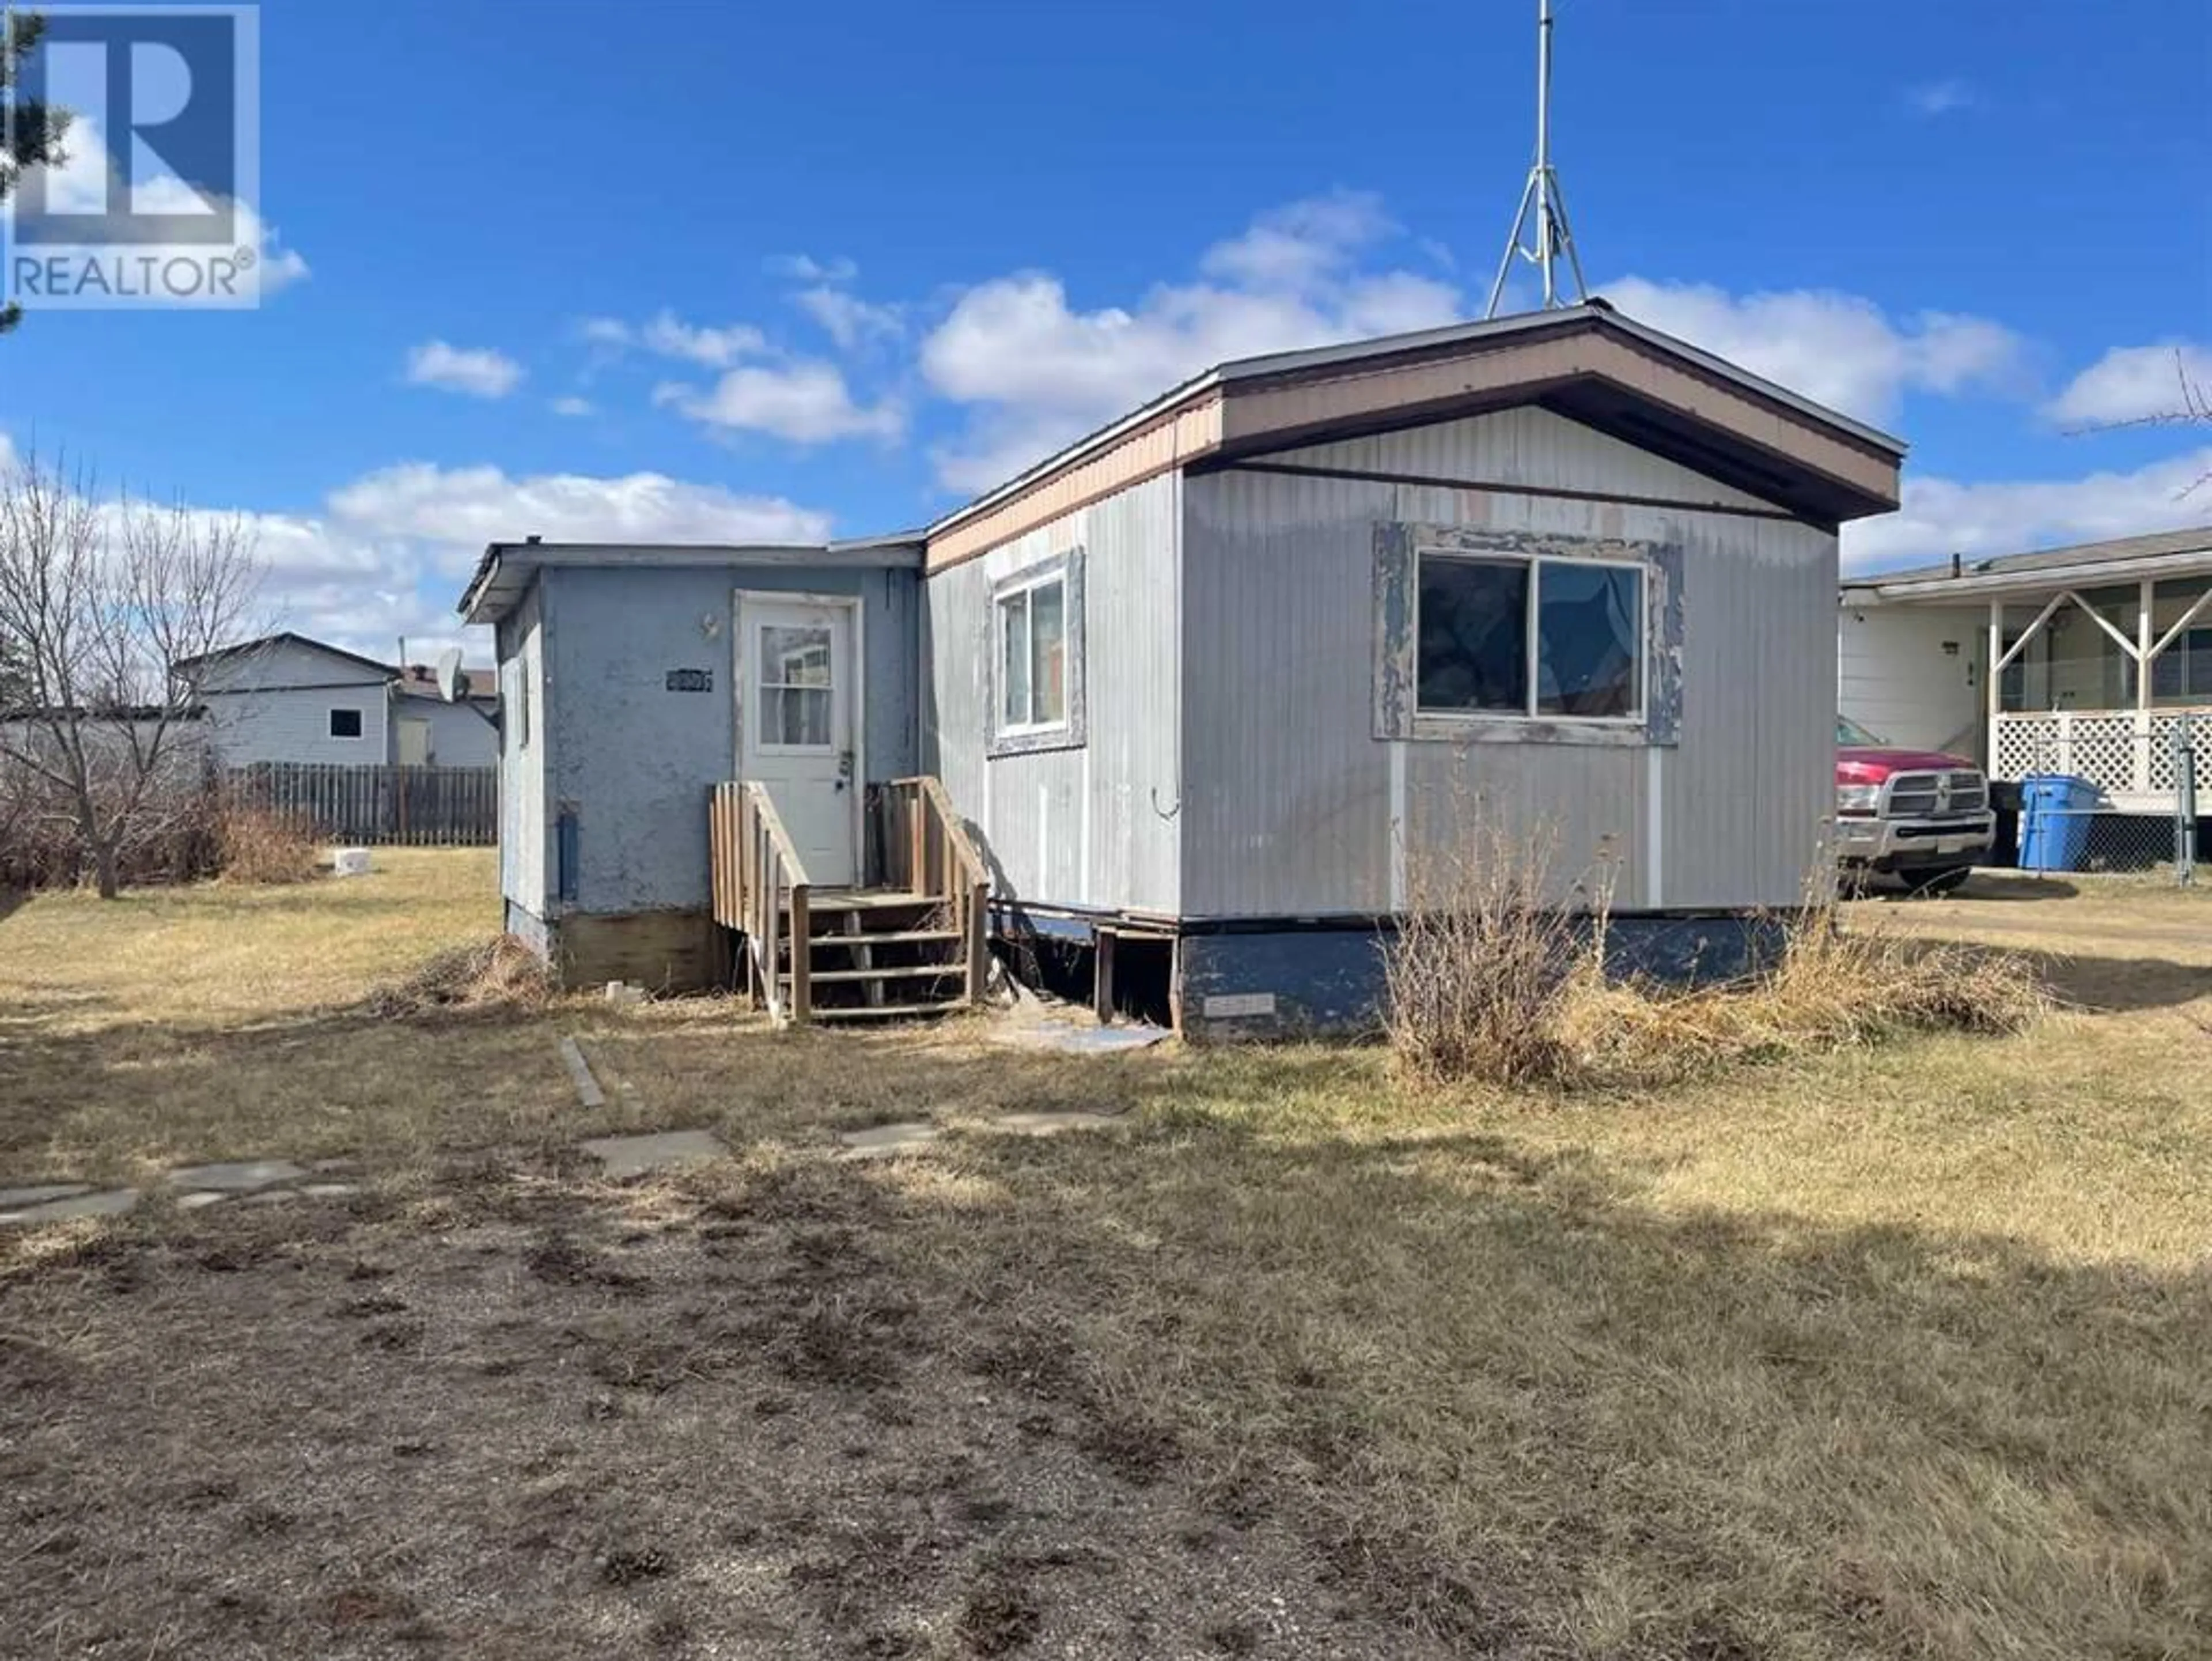 Shed for 10408 101 Street, Fairview Alberta T0H1L0